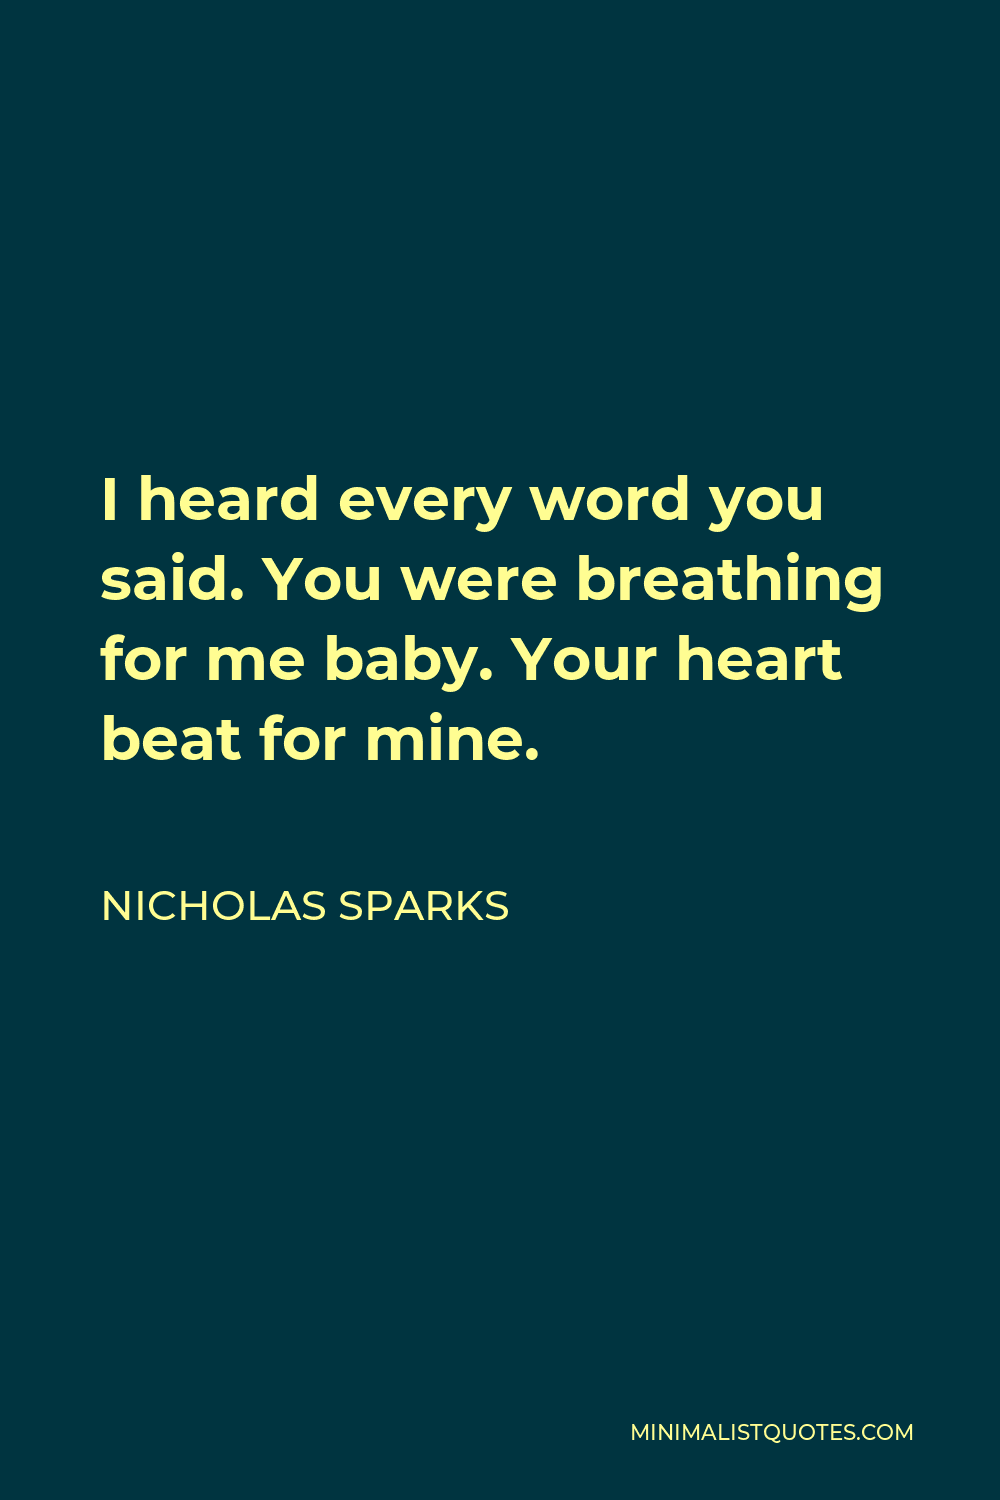 Nicholas Sparks Quote - I heard every word you said. You were breathing for me baby. Your heart beat for mine.